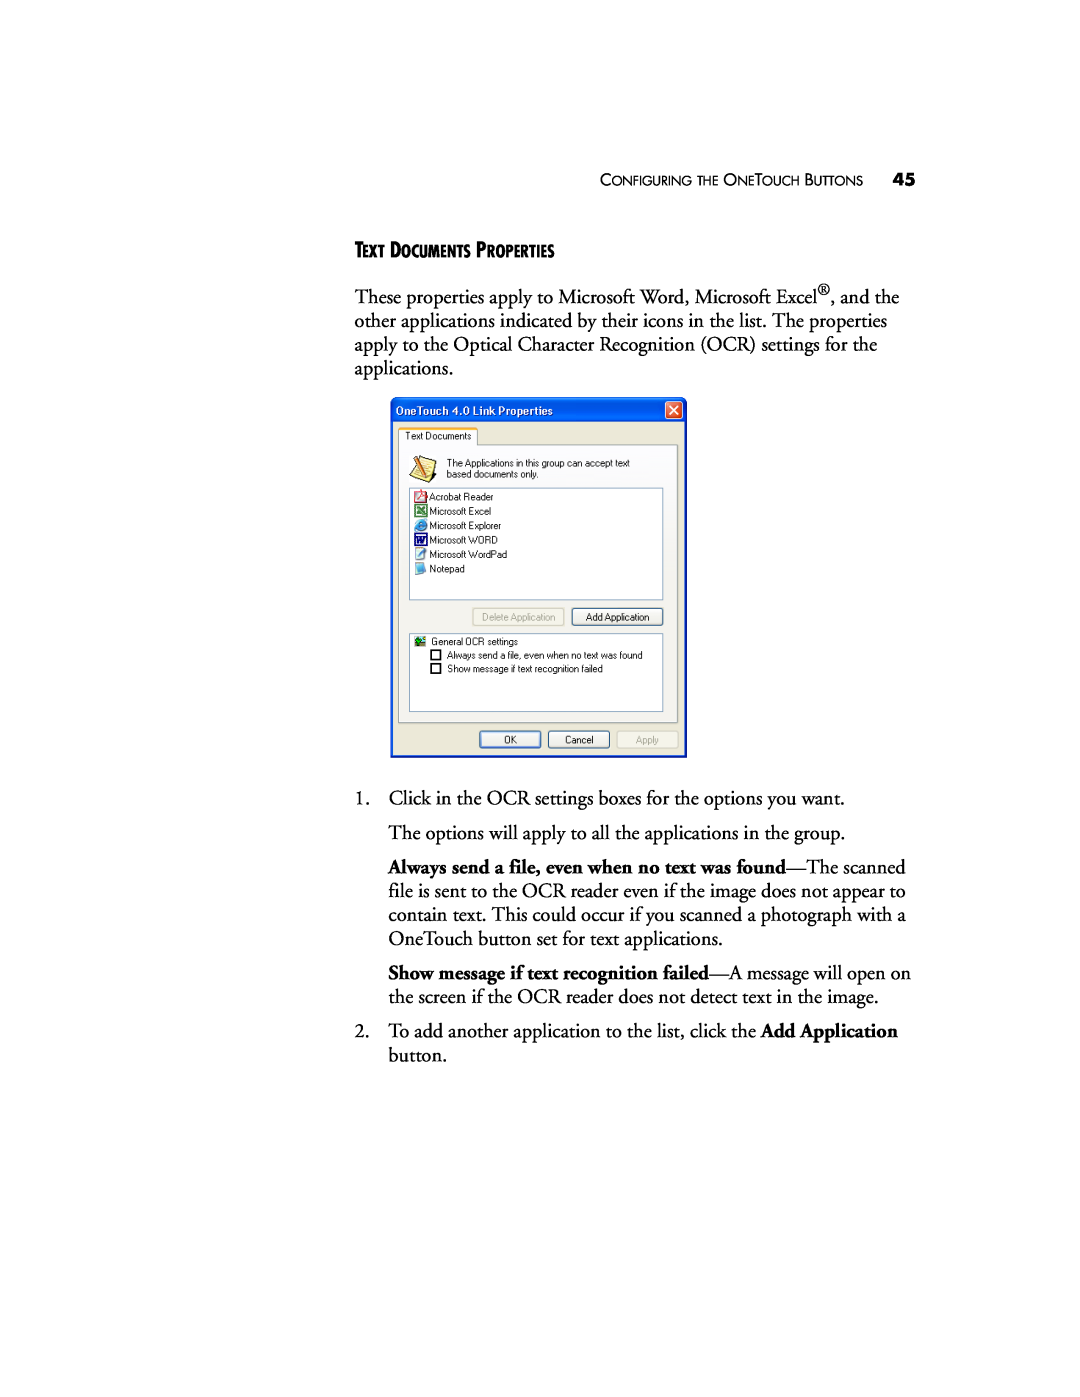 Visioneer 9750 manual Text Documents Properties 